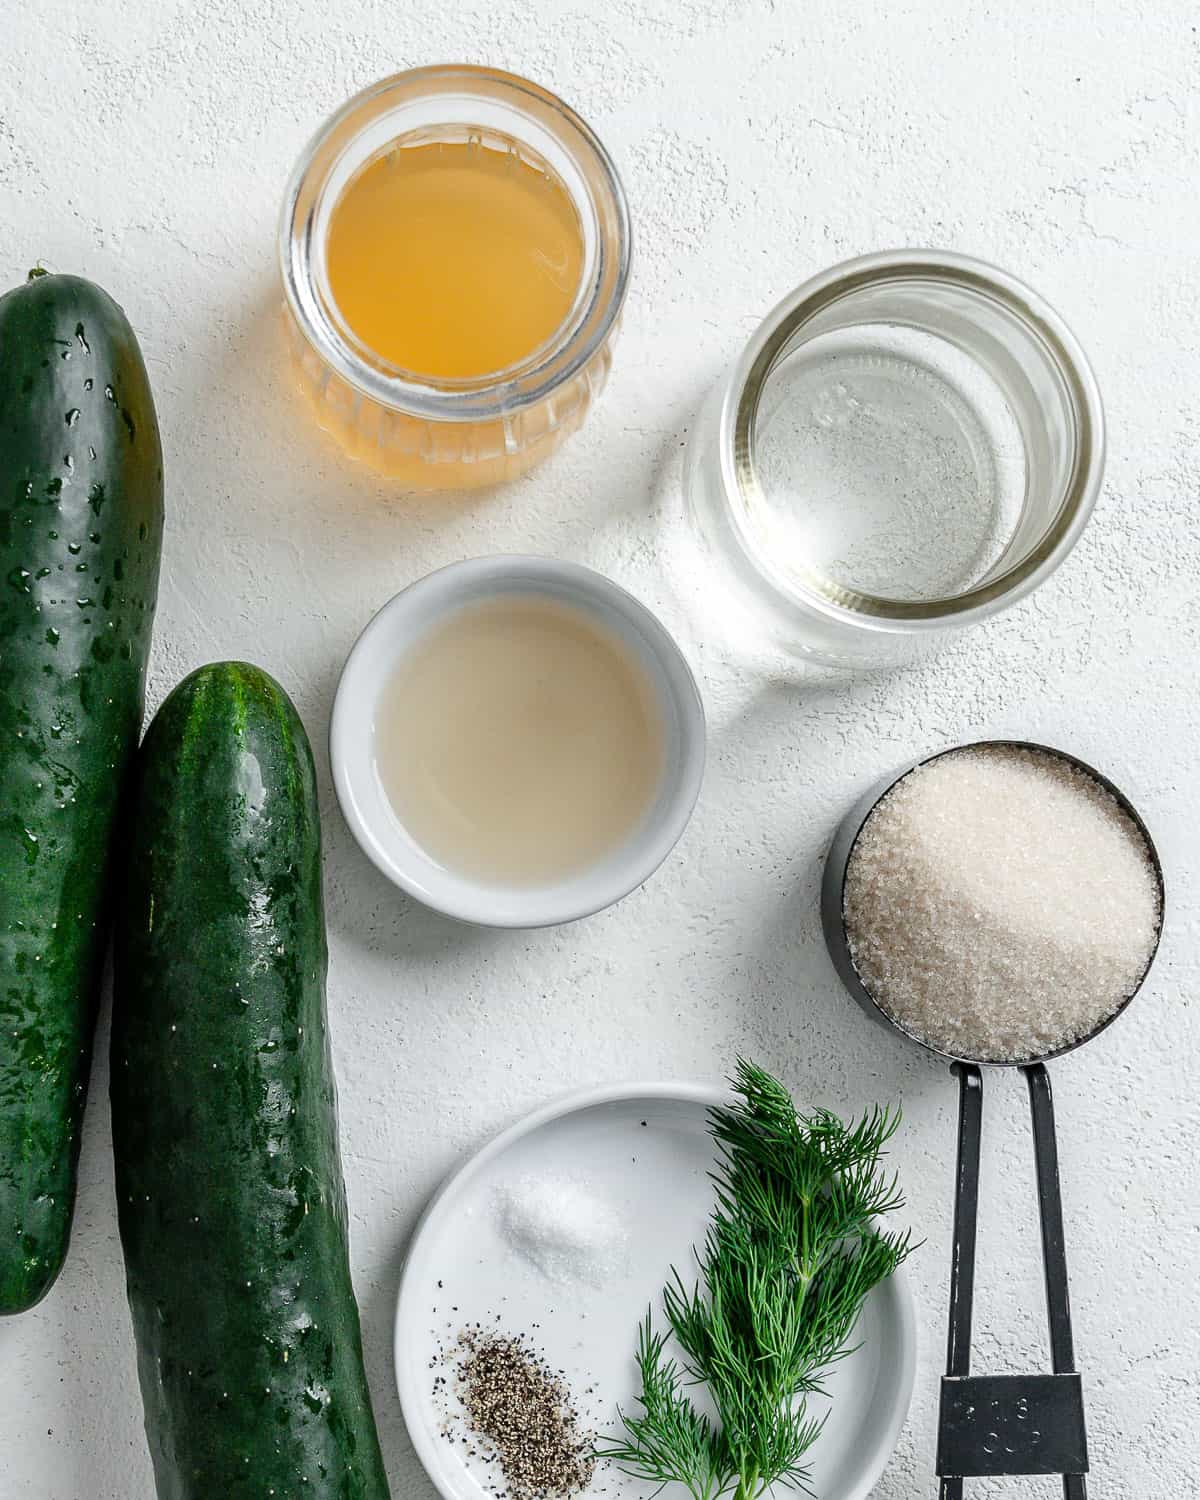 ingredients for marinated cucumber salad against a white surface